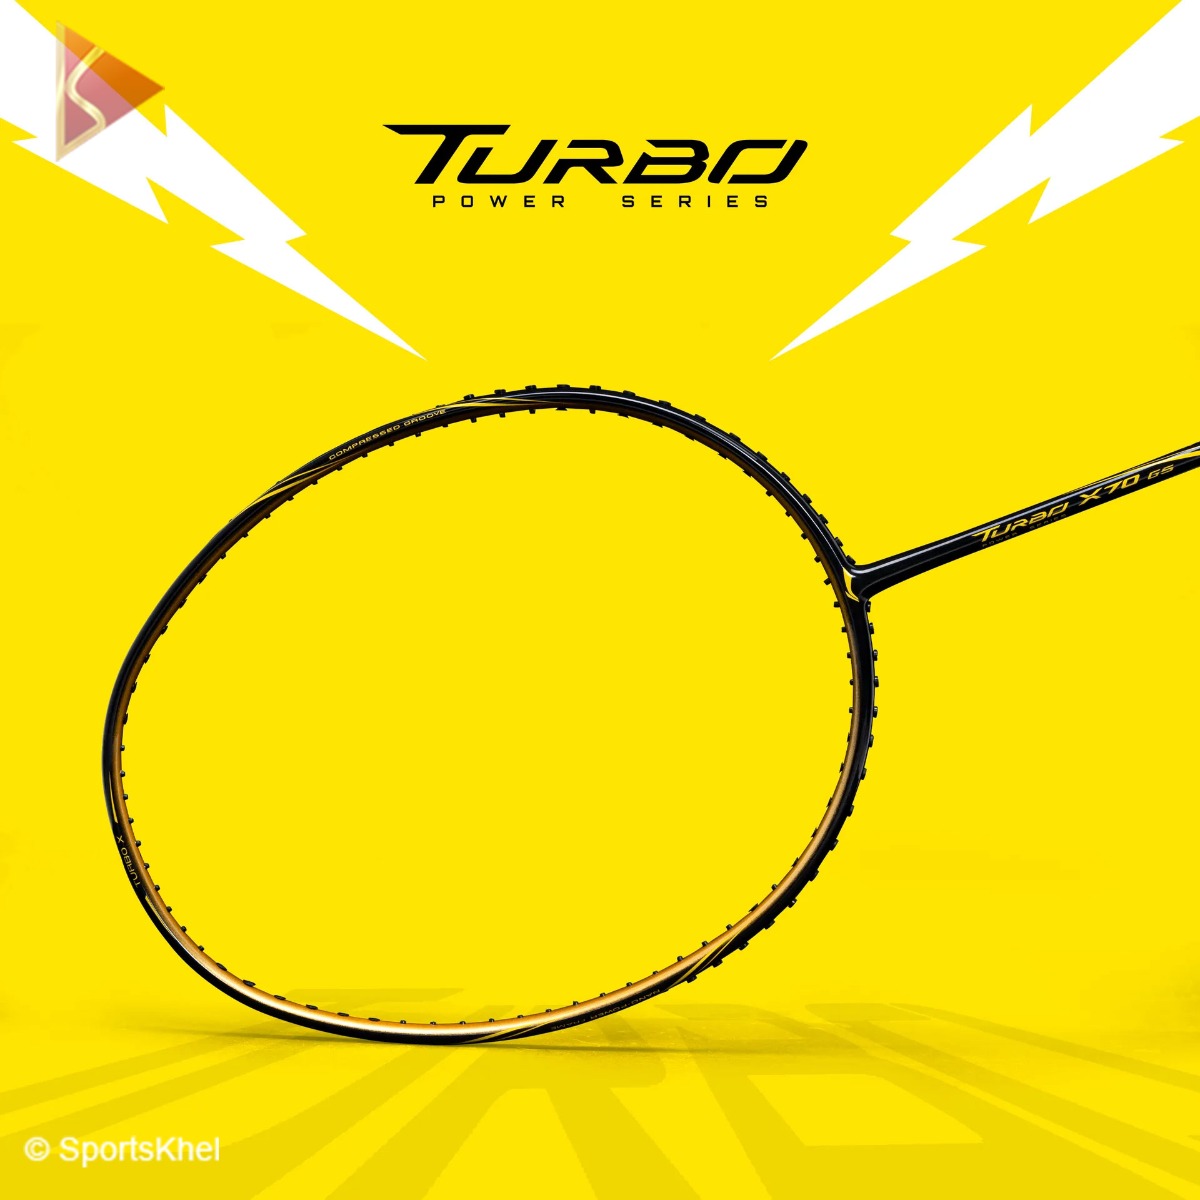 Lining Badminton Racket Features Dynamic Optimized Frame